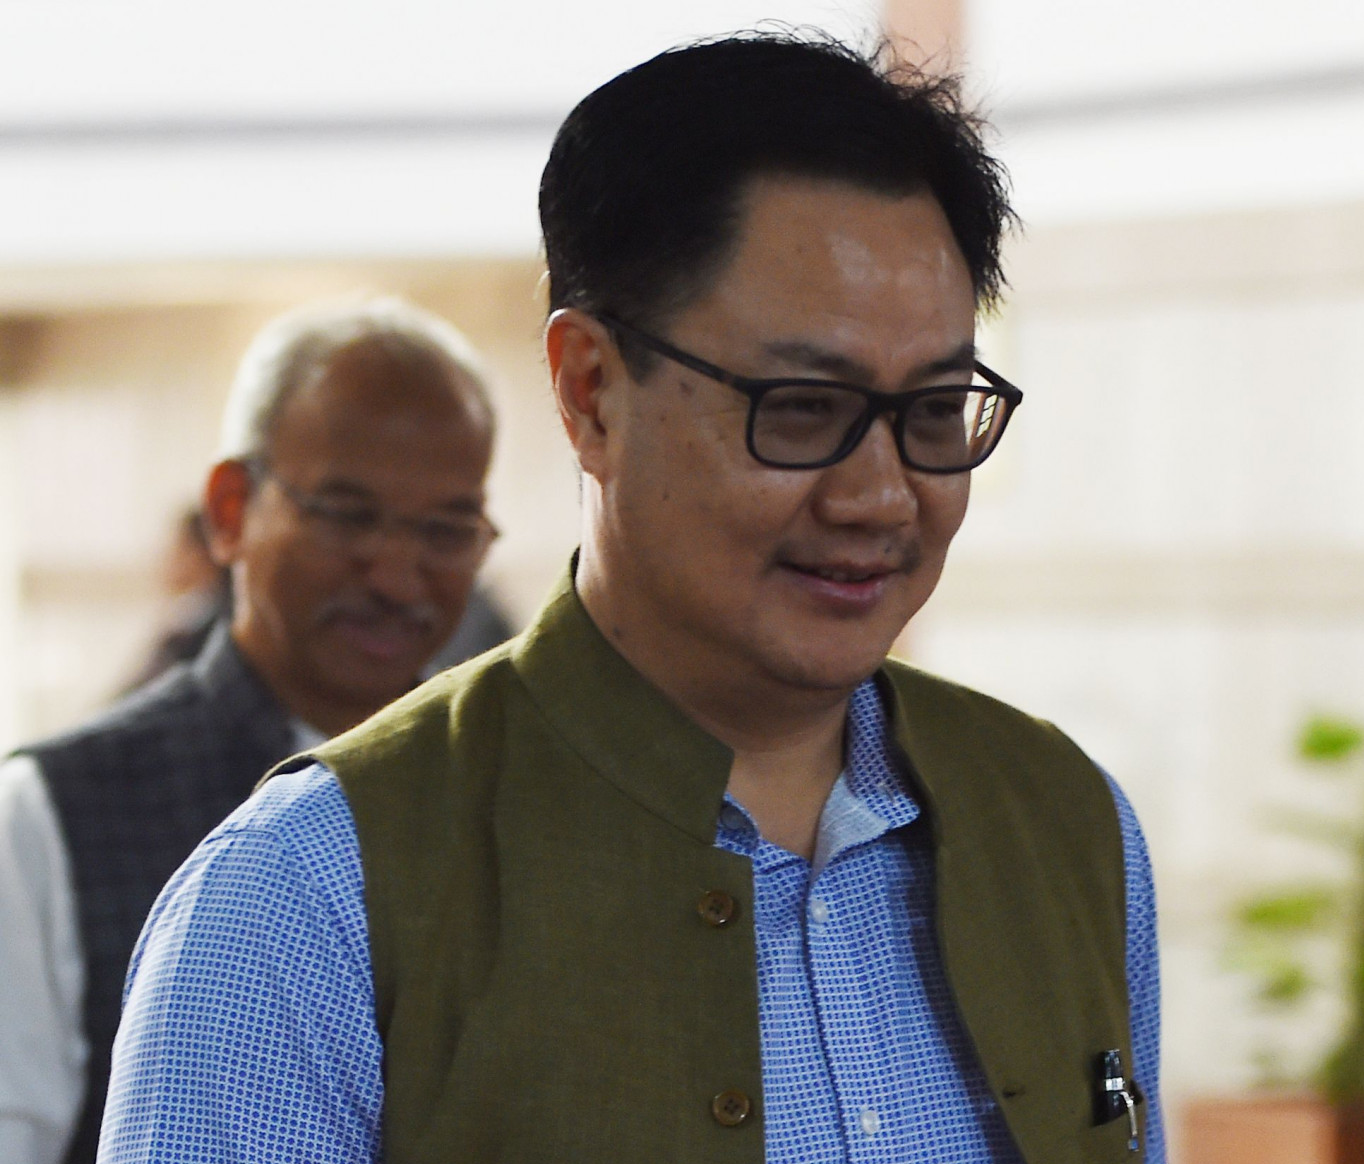 India's Sports Minister Kiren Rijiju has said helping India's Olympic athletes is a priority ©Getty Images